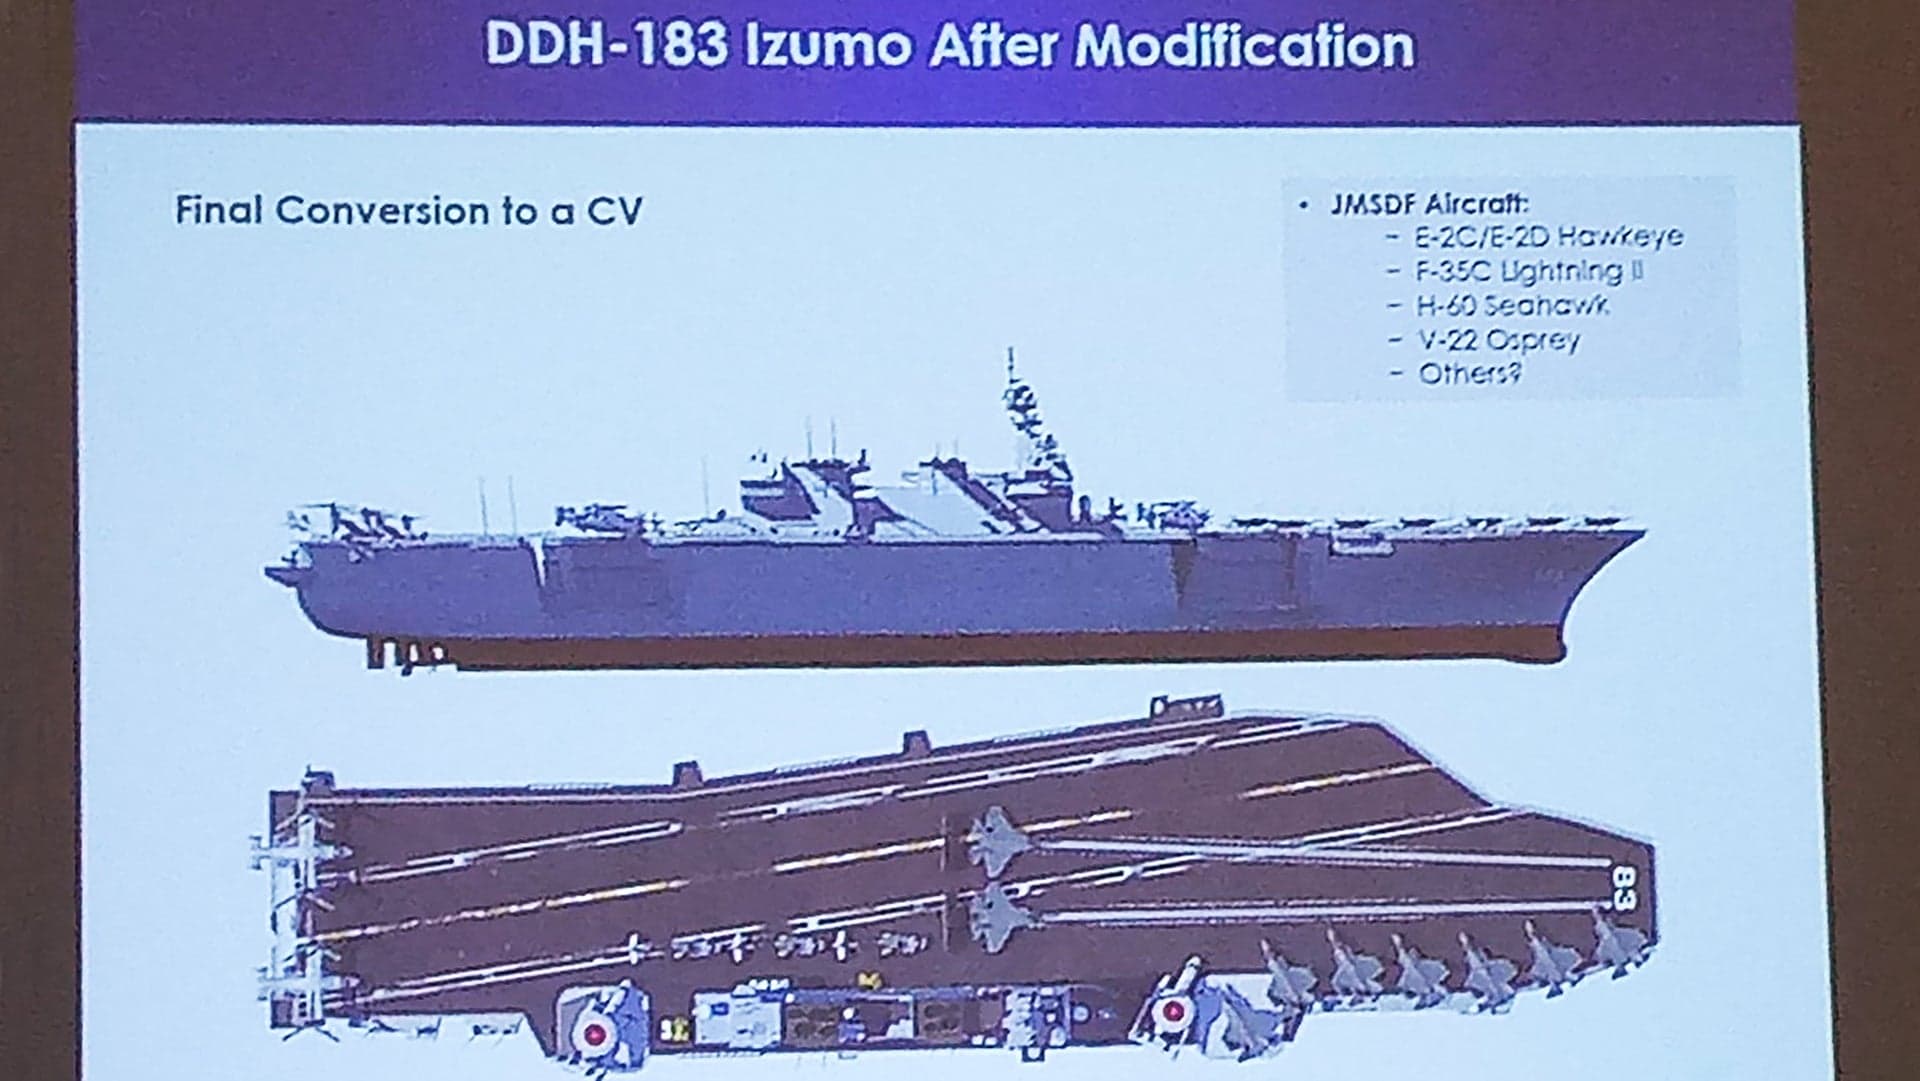 No, Japan Isn’t Going To Install Catapults And Angled Decks On Its Izumo Class Carriers